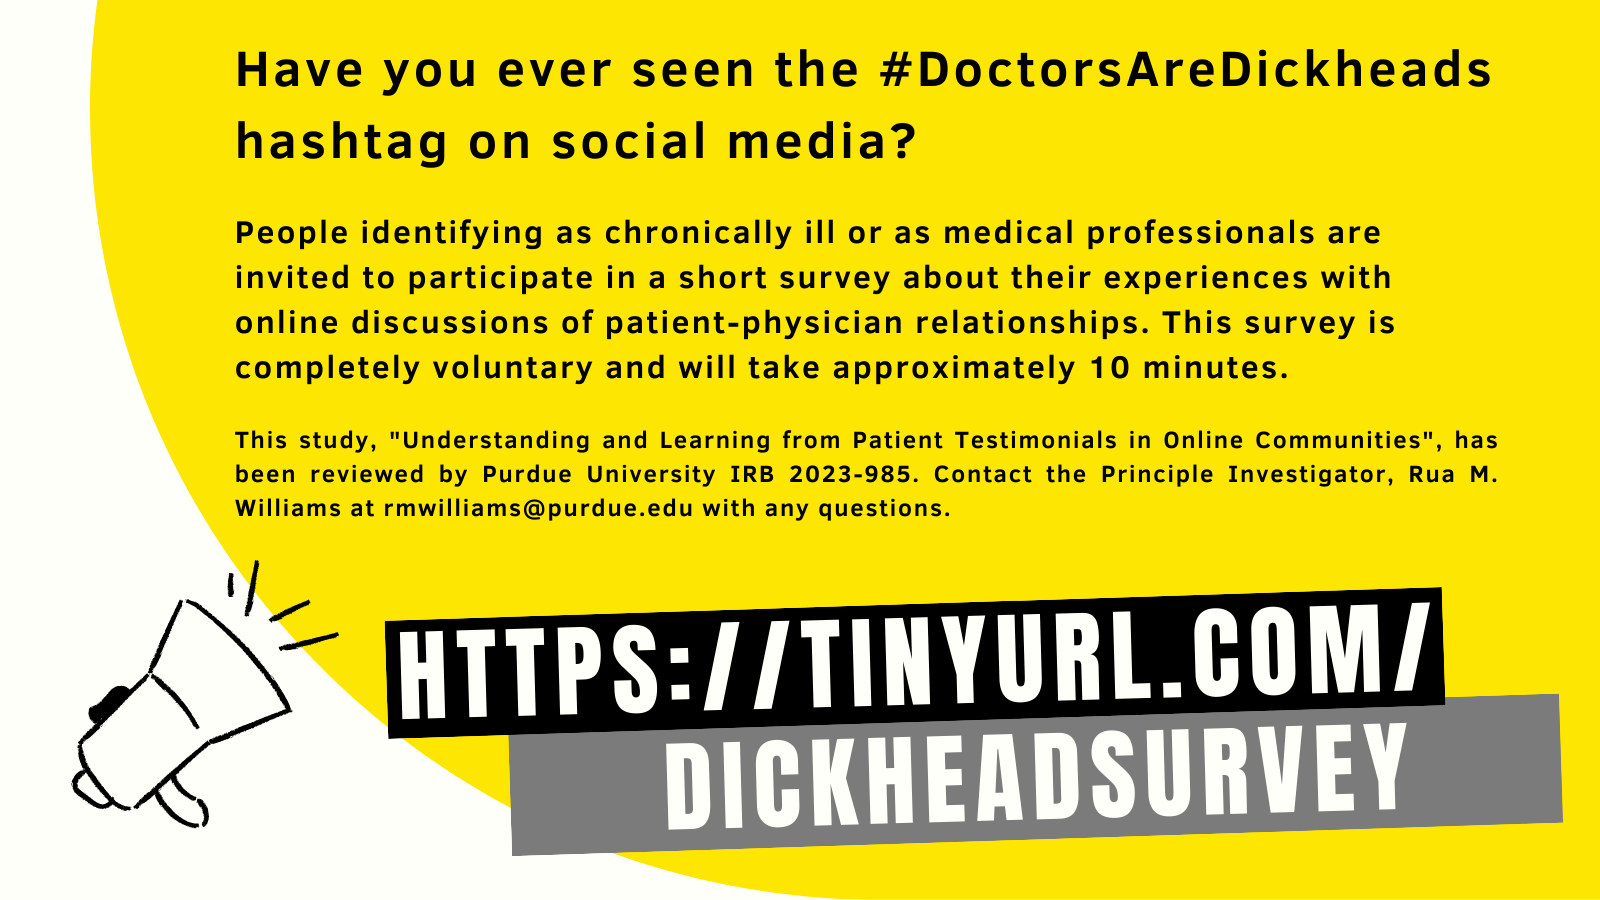 Image is sketch of a megaphone over yellow background. Text reads "Have you ever seen the #DocktorsAreDickheads hashtag on social media? People identifying as chronically ill or as medical professionals are invited to participate in a short survey about their experiences with online discussions of patient-physician relationships. This survey is completely voluntary and will take approximately 10 minutes. This study "Understanding and LEarning from Patient Testimonials in Online Communities", has been reviewed by Purdue University IRB 2023-985. Contact the Principle Investigator, Rua M. Williams at rmwilliams@purdue.edu with any questions. https://tinyurl.com/dickheadsurvey"